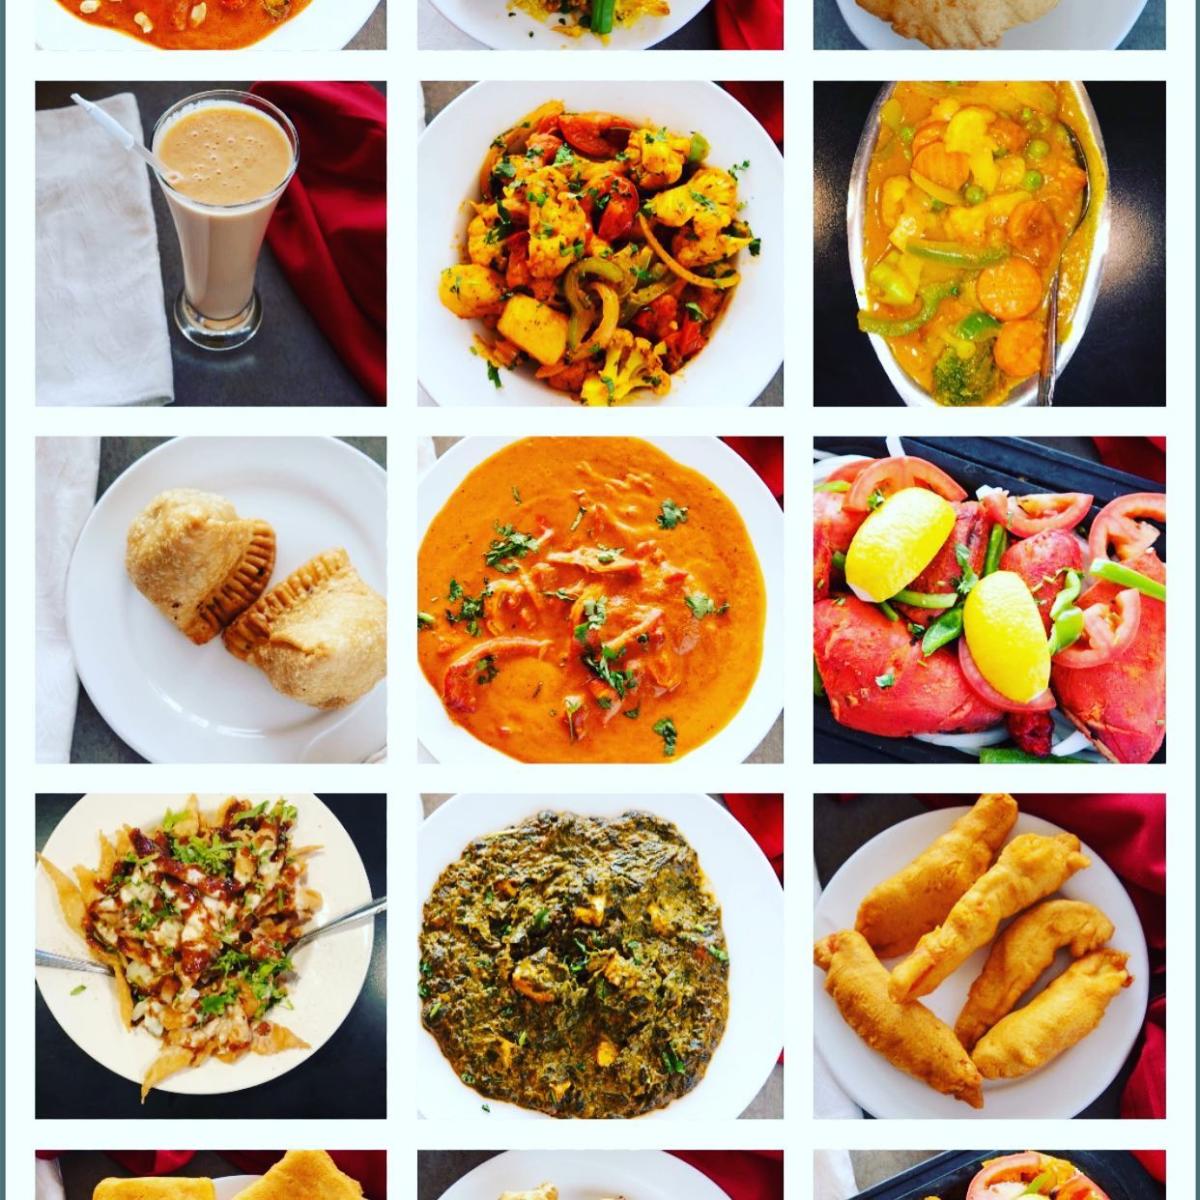 Tiled images of all types of Indian cuisine including nan, curry and drinks.